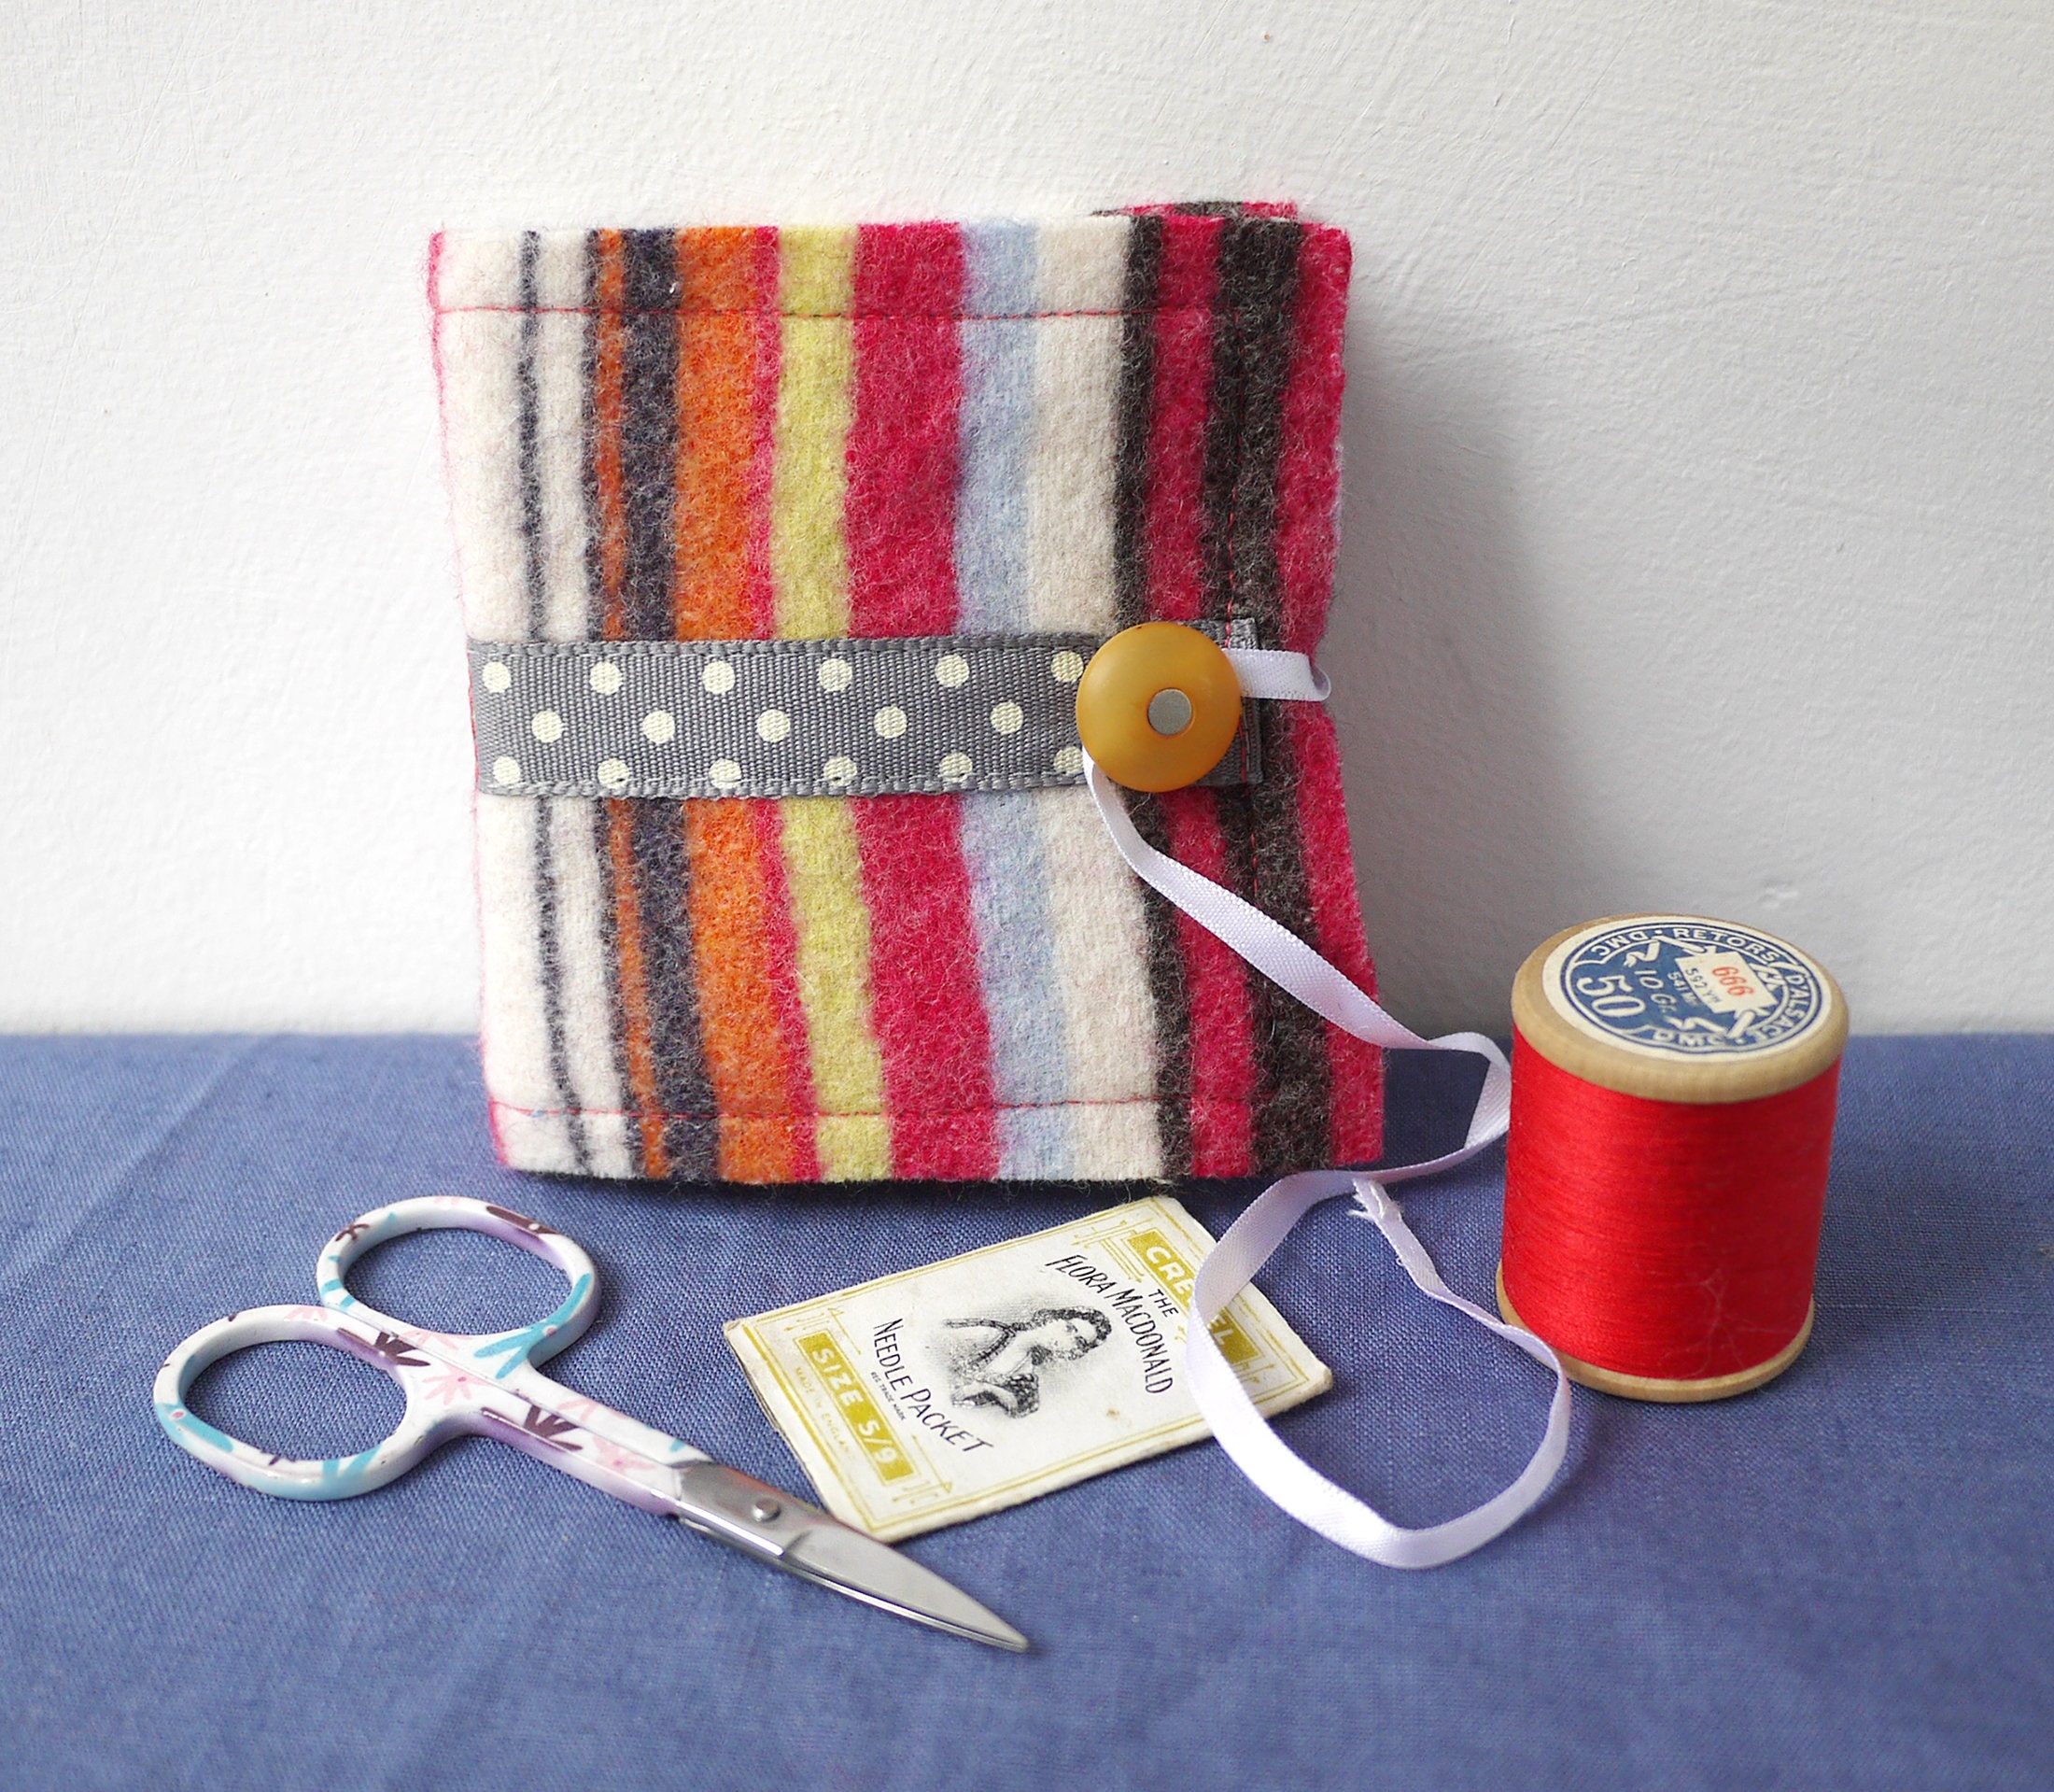 Hand Embroidered Felt Needle Case Country Home Sewing Gift in 